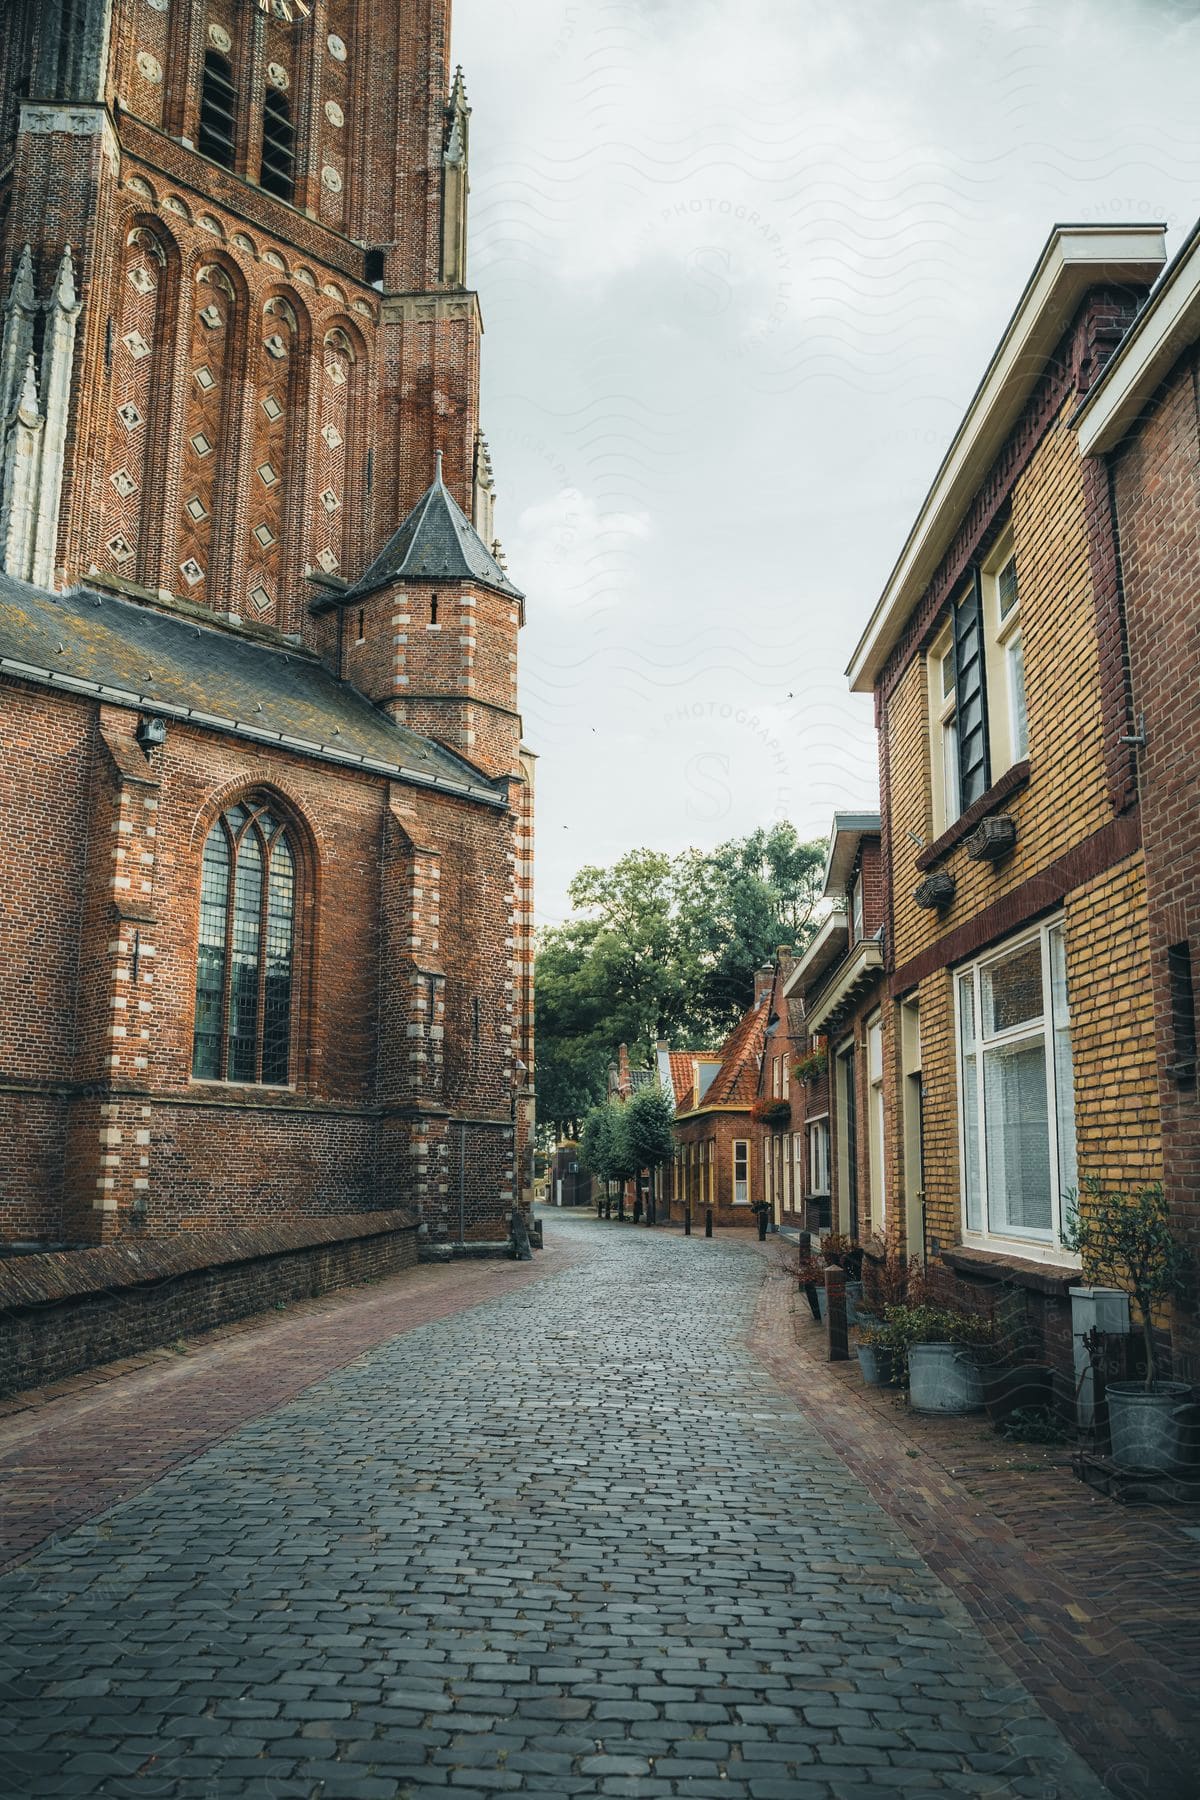 a medieval cruciform church in the fortified city of Woudrichem